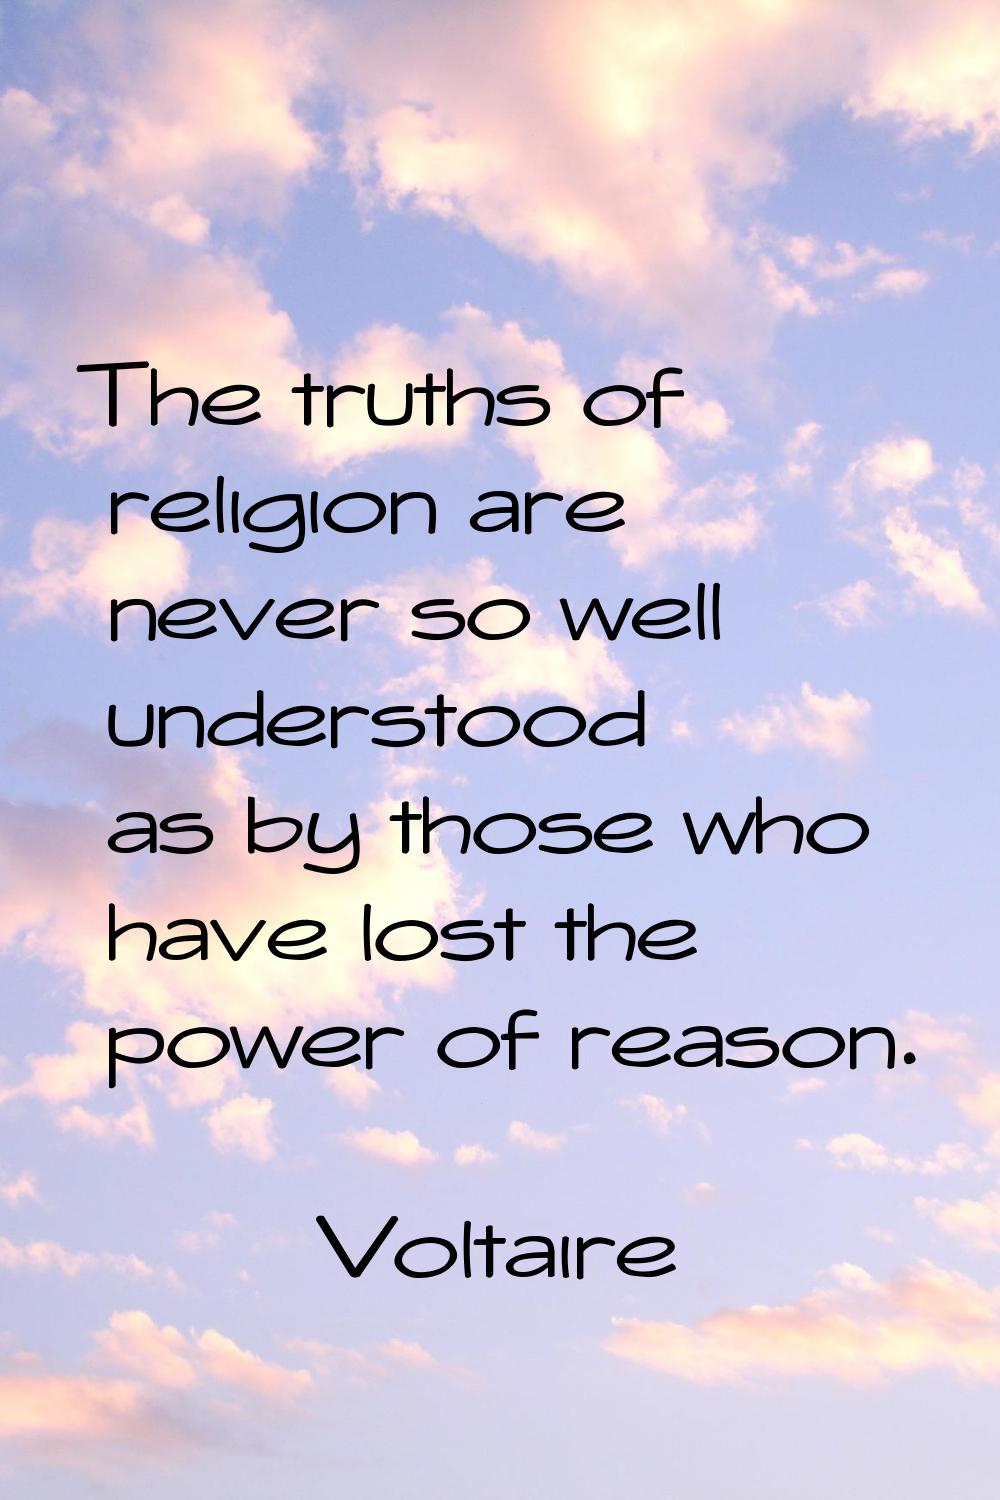 The truths of religion are never so well understood as by those who have lost the power of reason.